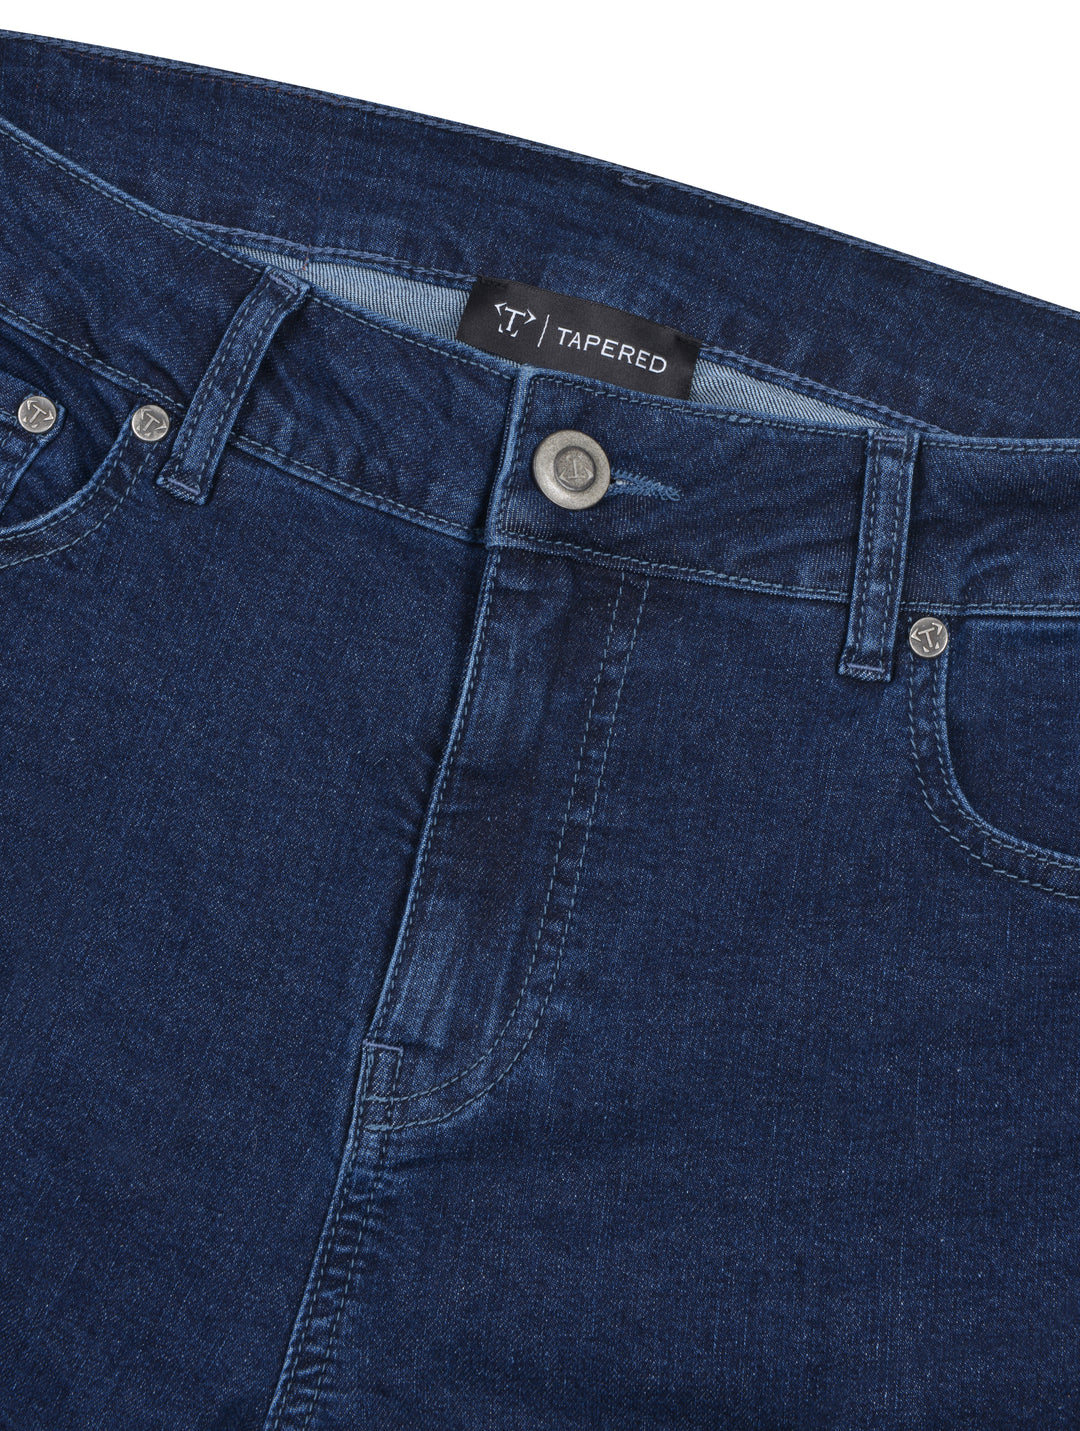 Mens Navy Blue Tapered Fit Jeans with Silver Buttons.